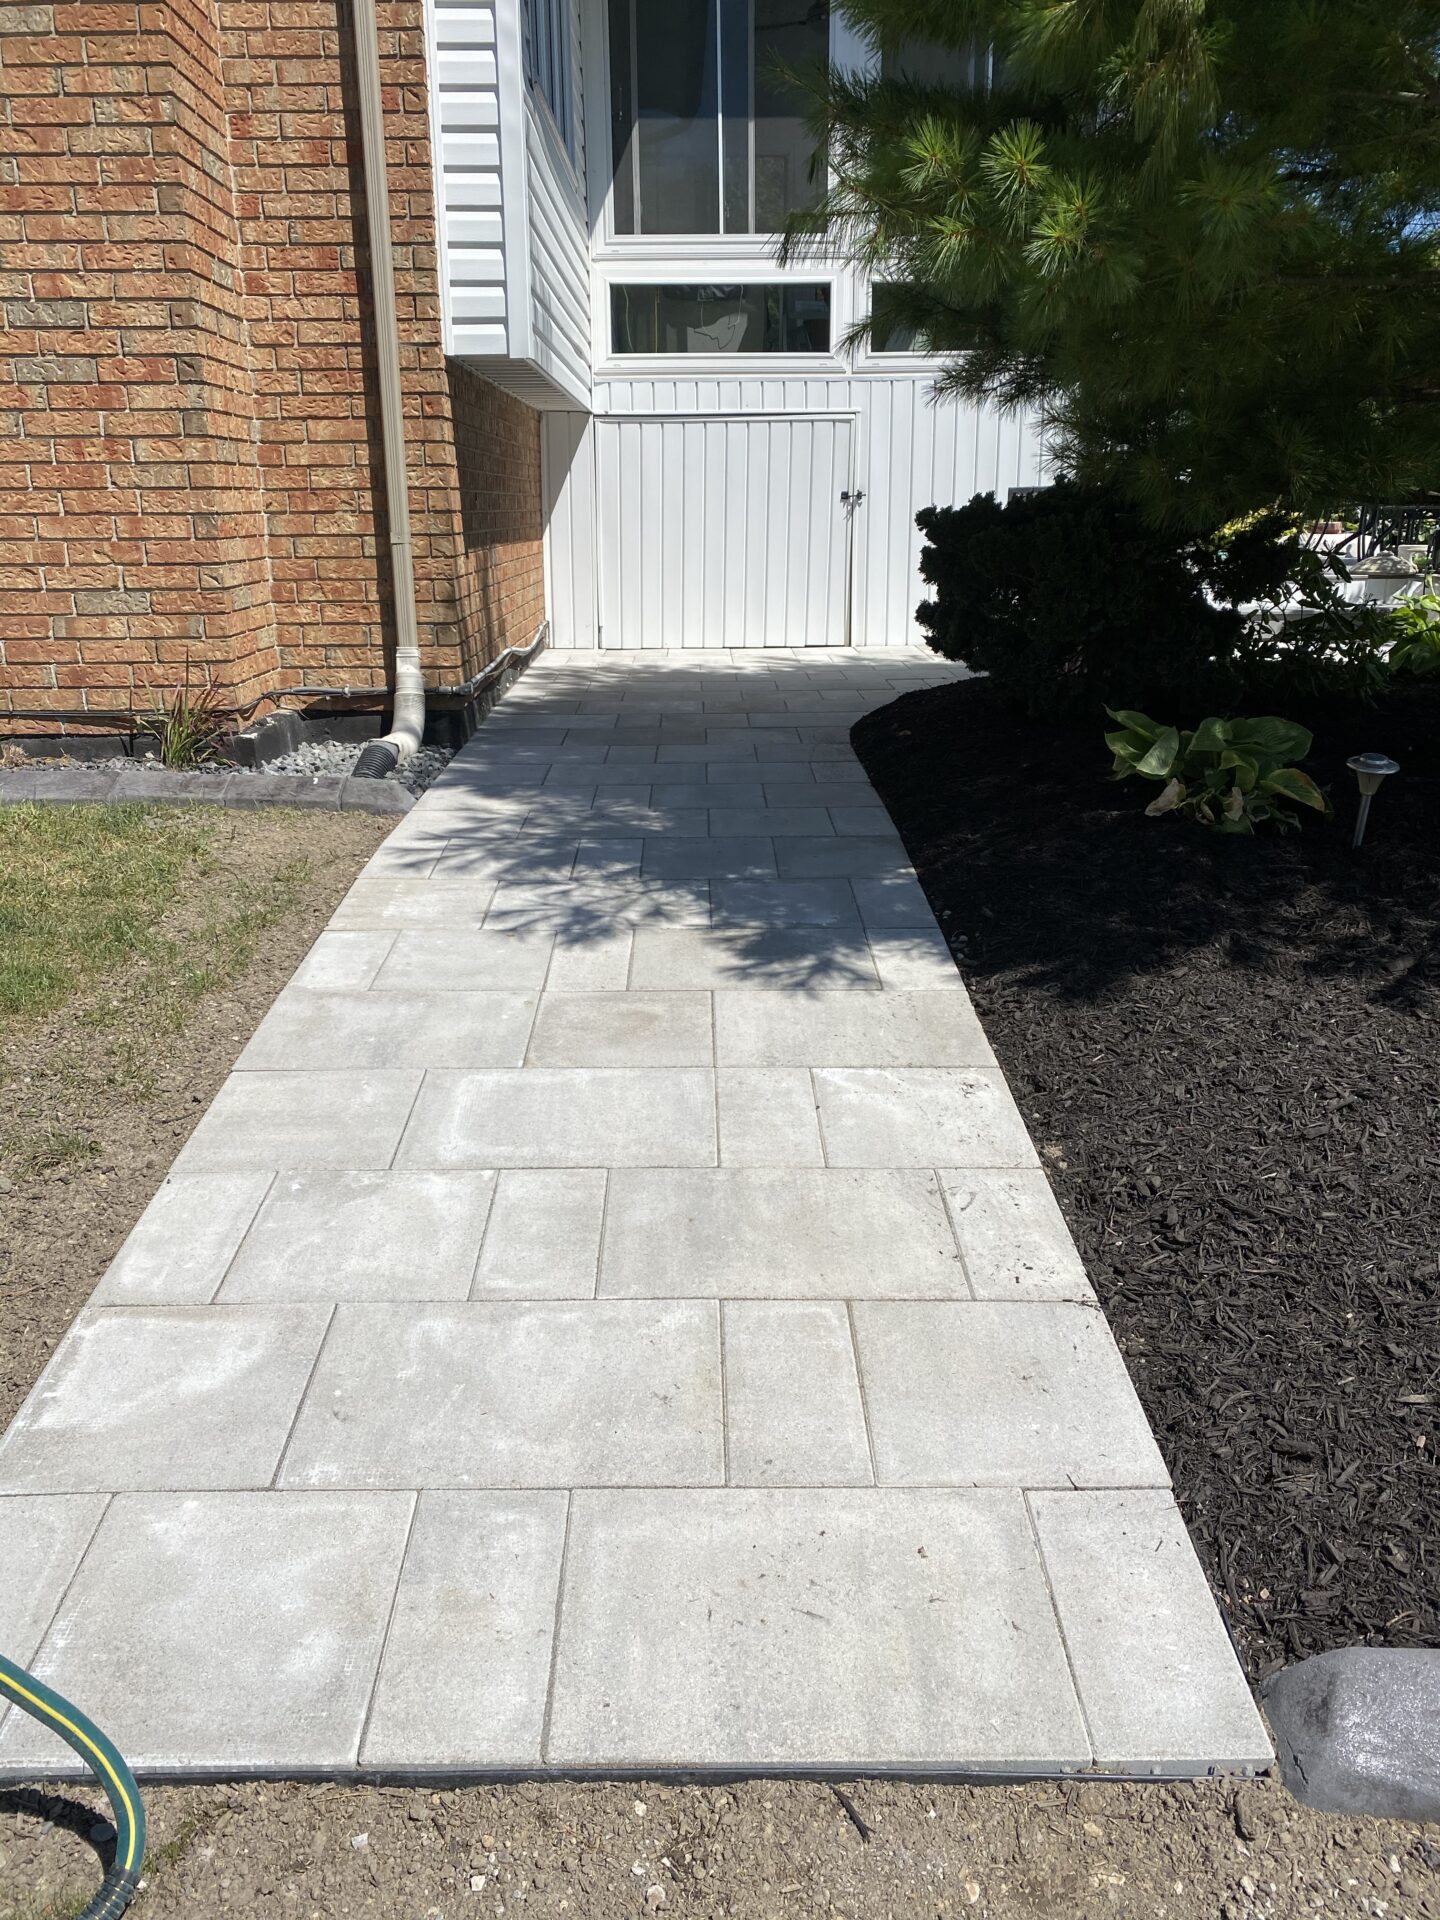 This image shows a neatly paved pathway leading to a side entrance with white siding. A large brick wall and lush greenery border the path.